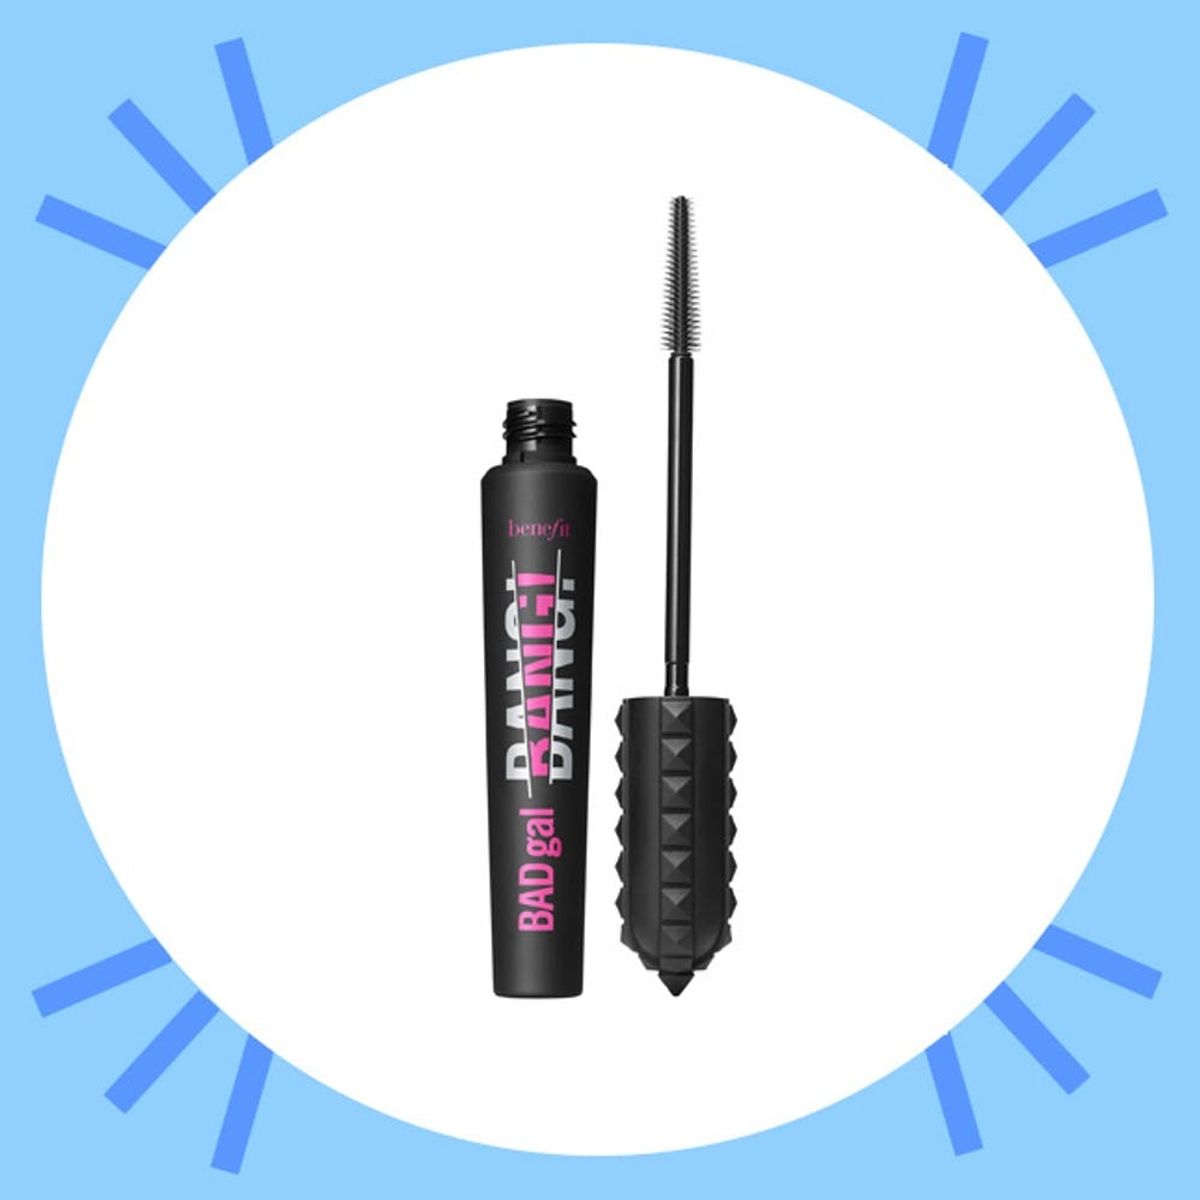 The New Benefit Mascara Was Made With Space Technology